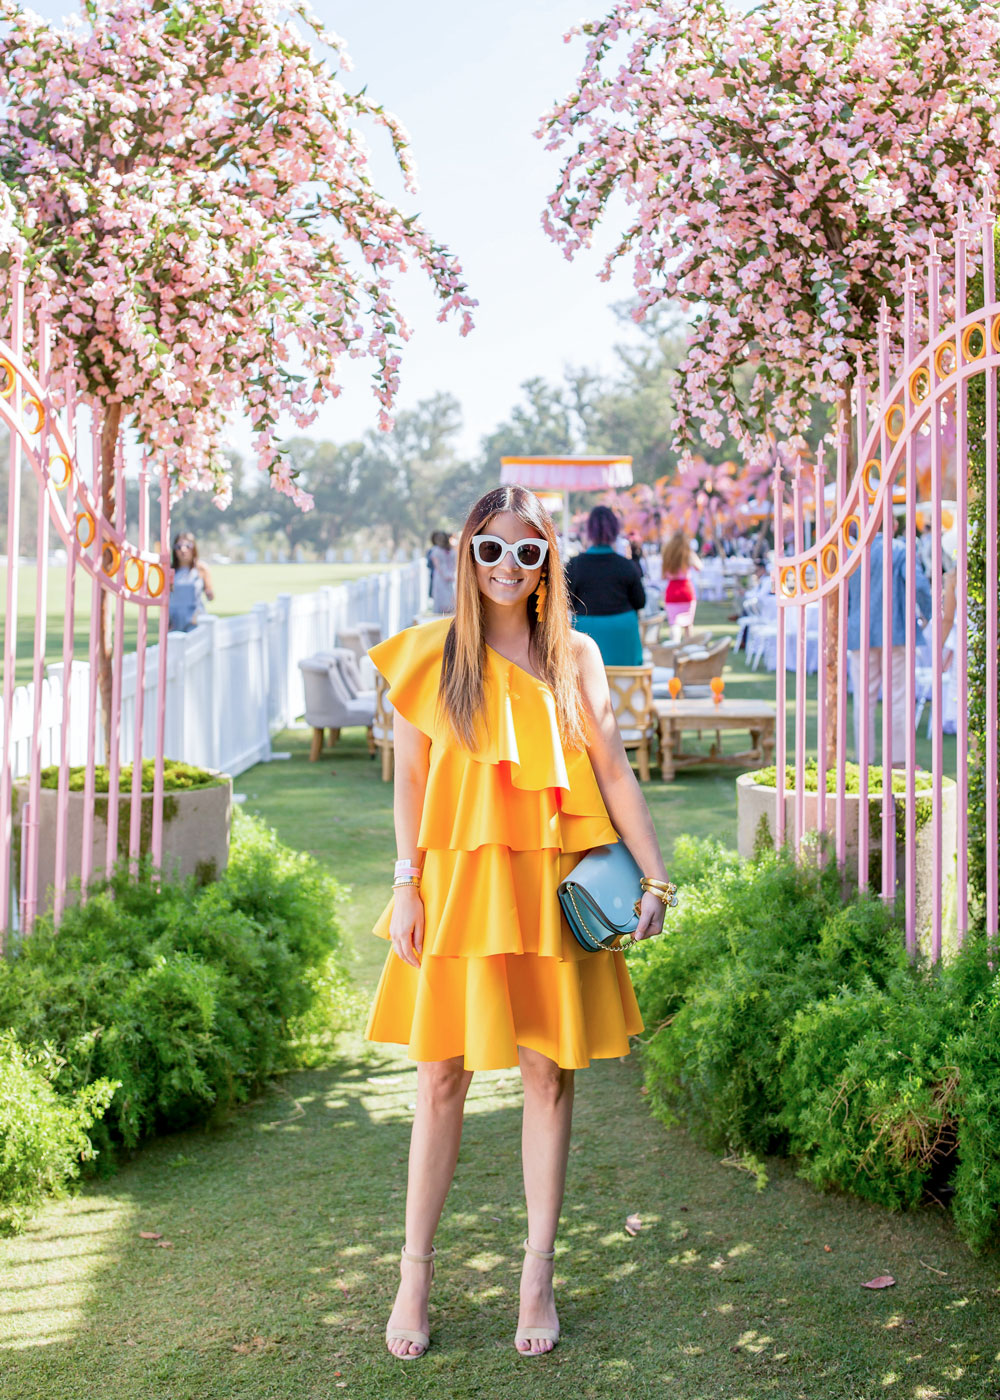 Veuve Clicquot Polo Classic Los Angeles: Must-Attend Event